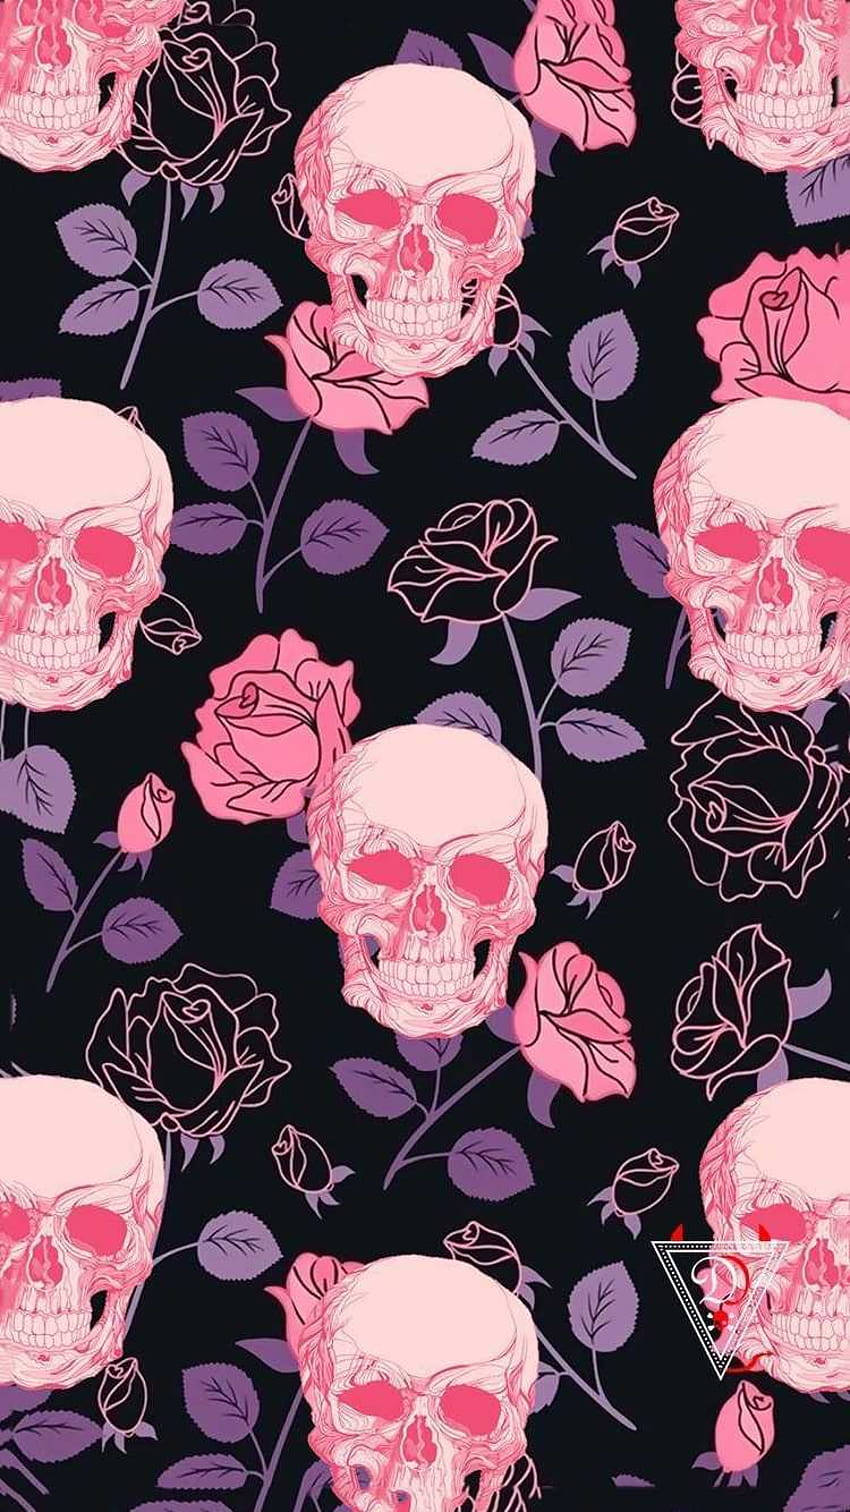 A look at the dark and mysterious Goth aesthetic Wallpaper